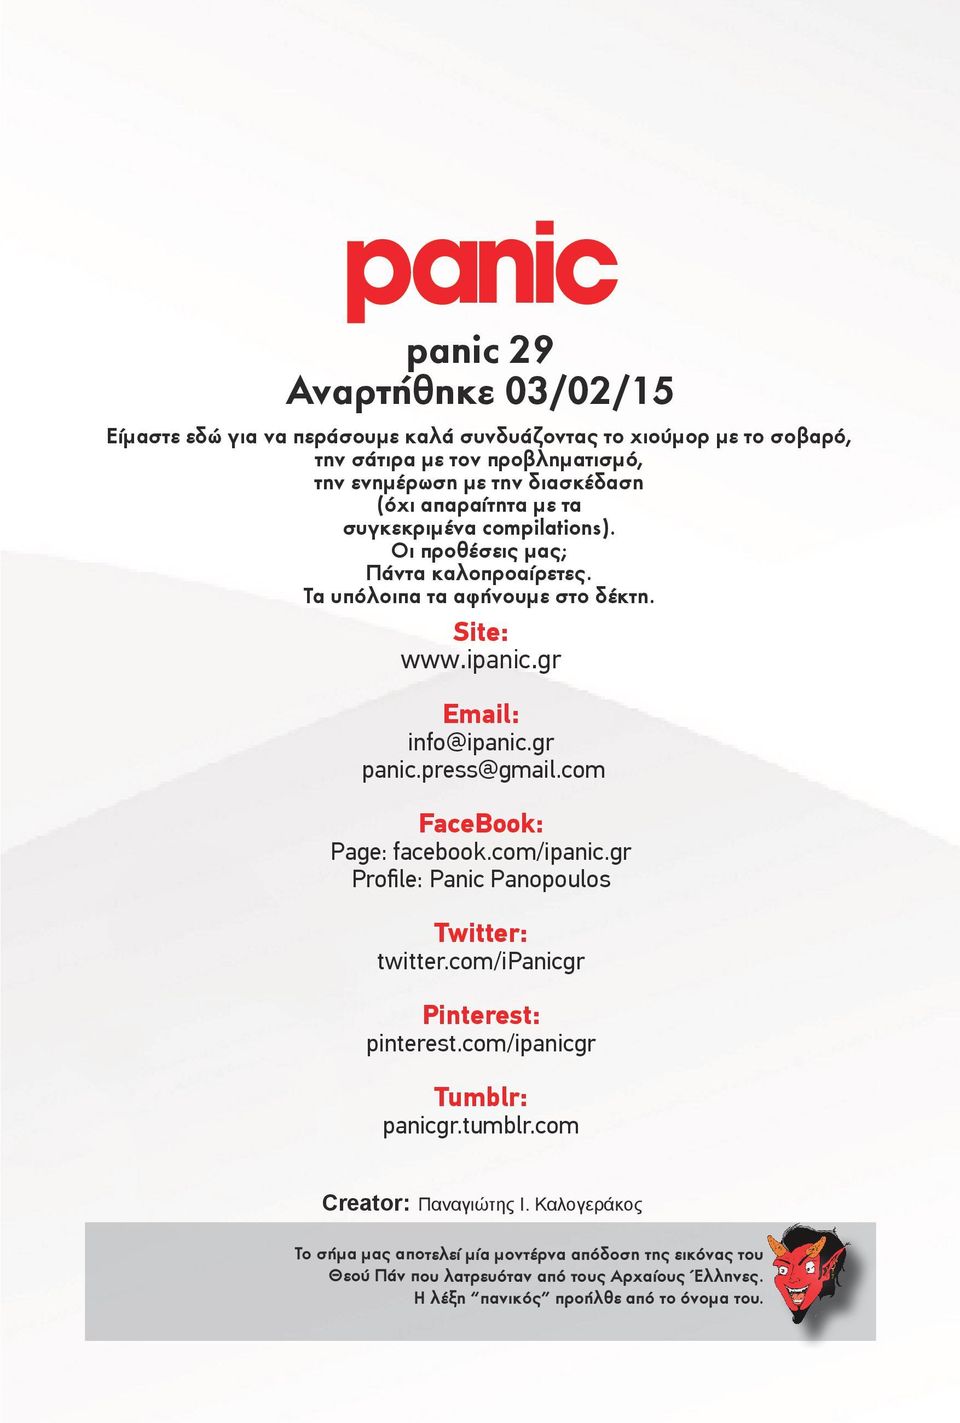 press@gmail.com FaceBook: Page: facebook.com/ipanic.gr Profile: Panic Panopoulos Twitter: twitter.com/ipanicgr Pinterest: pinterest.com/ipanicgr Tumblr: panicgr.tumblr.